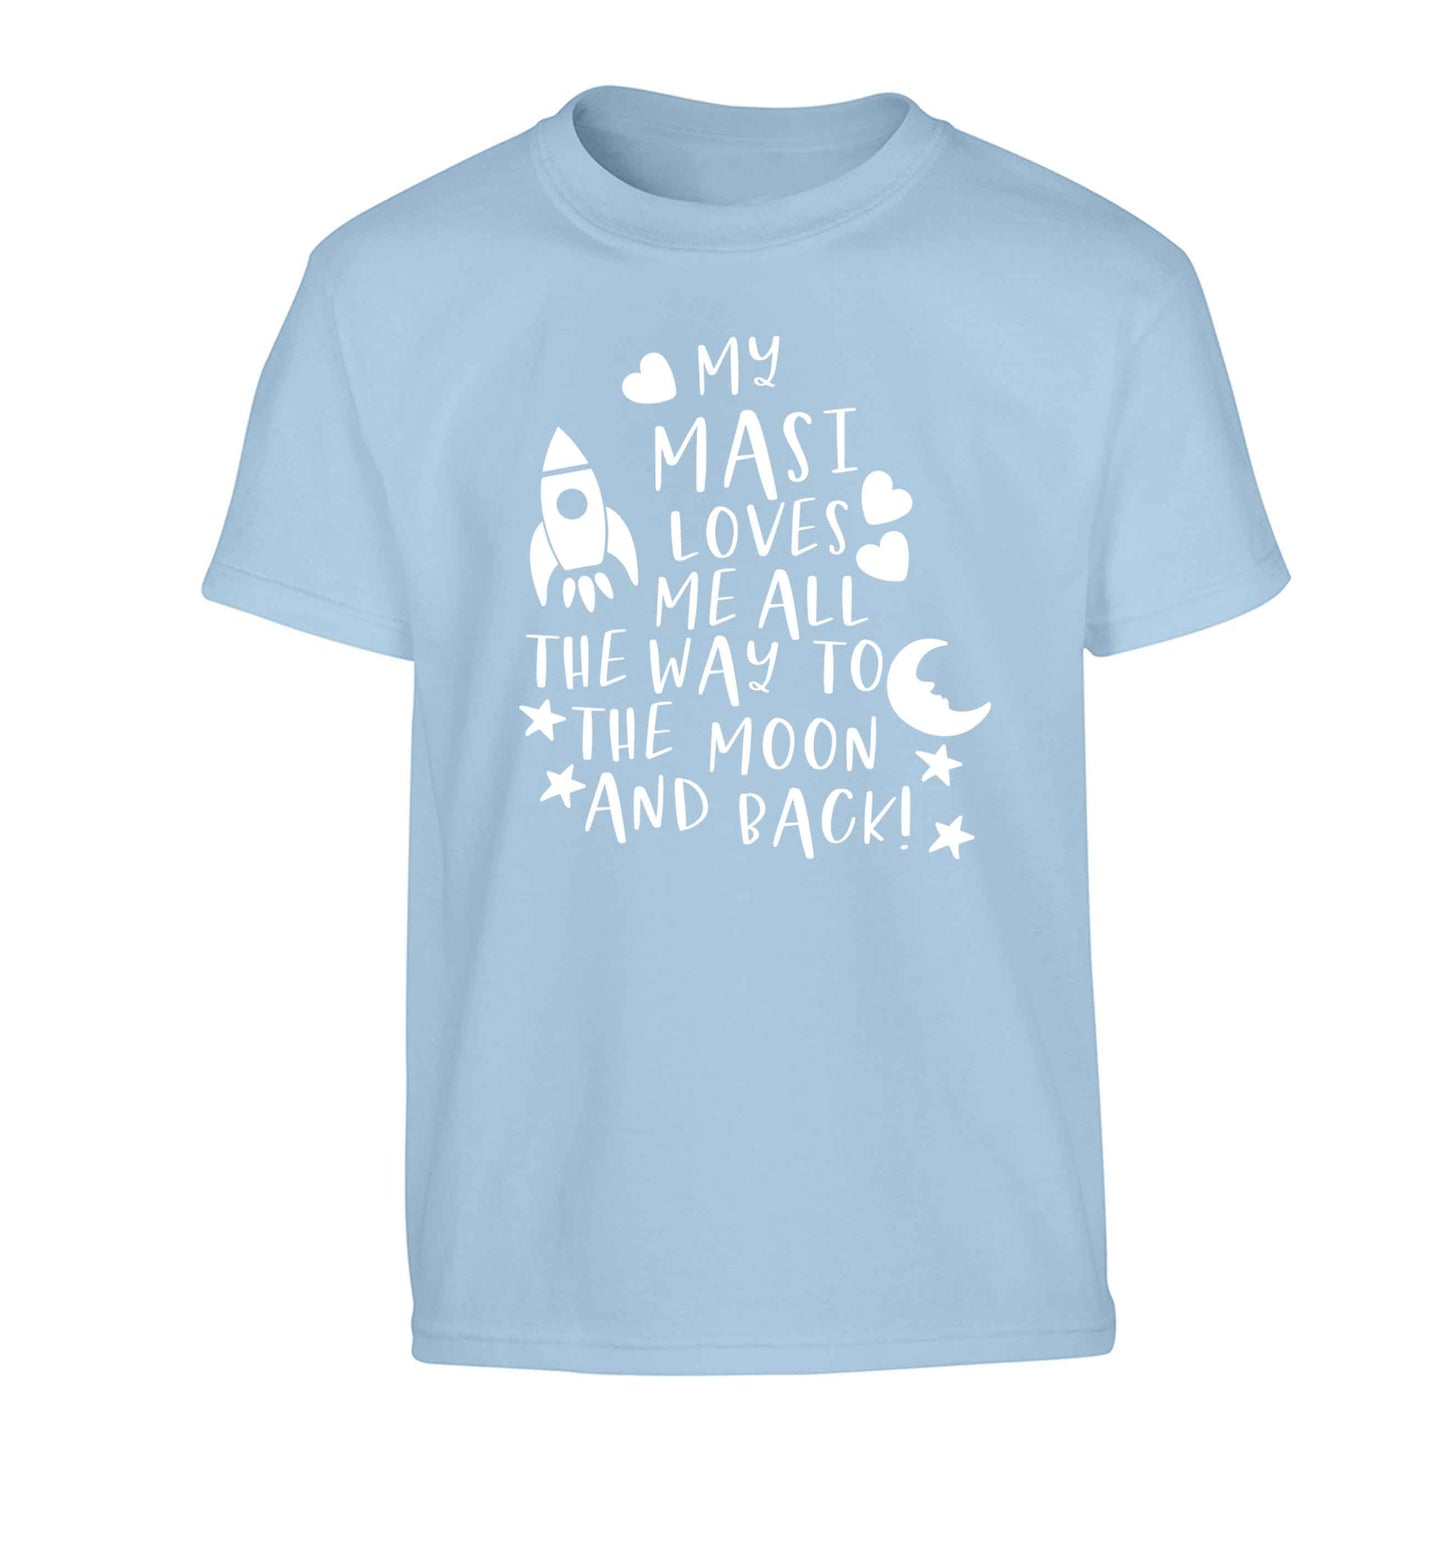 My masi loves me all the way to the moon and back Children's light blue Tshirt 12-13 Years